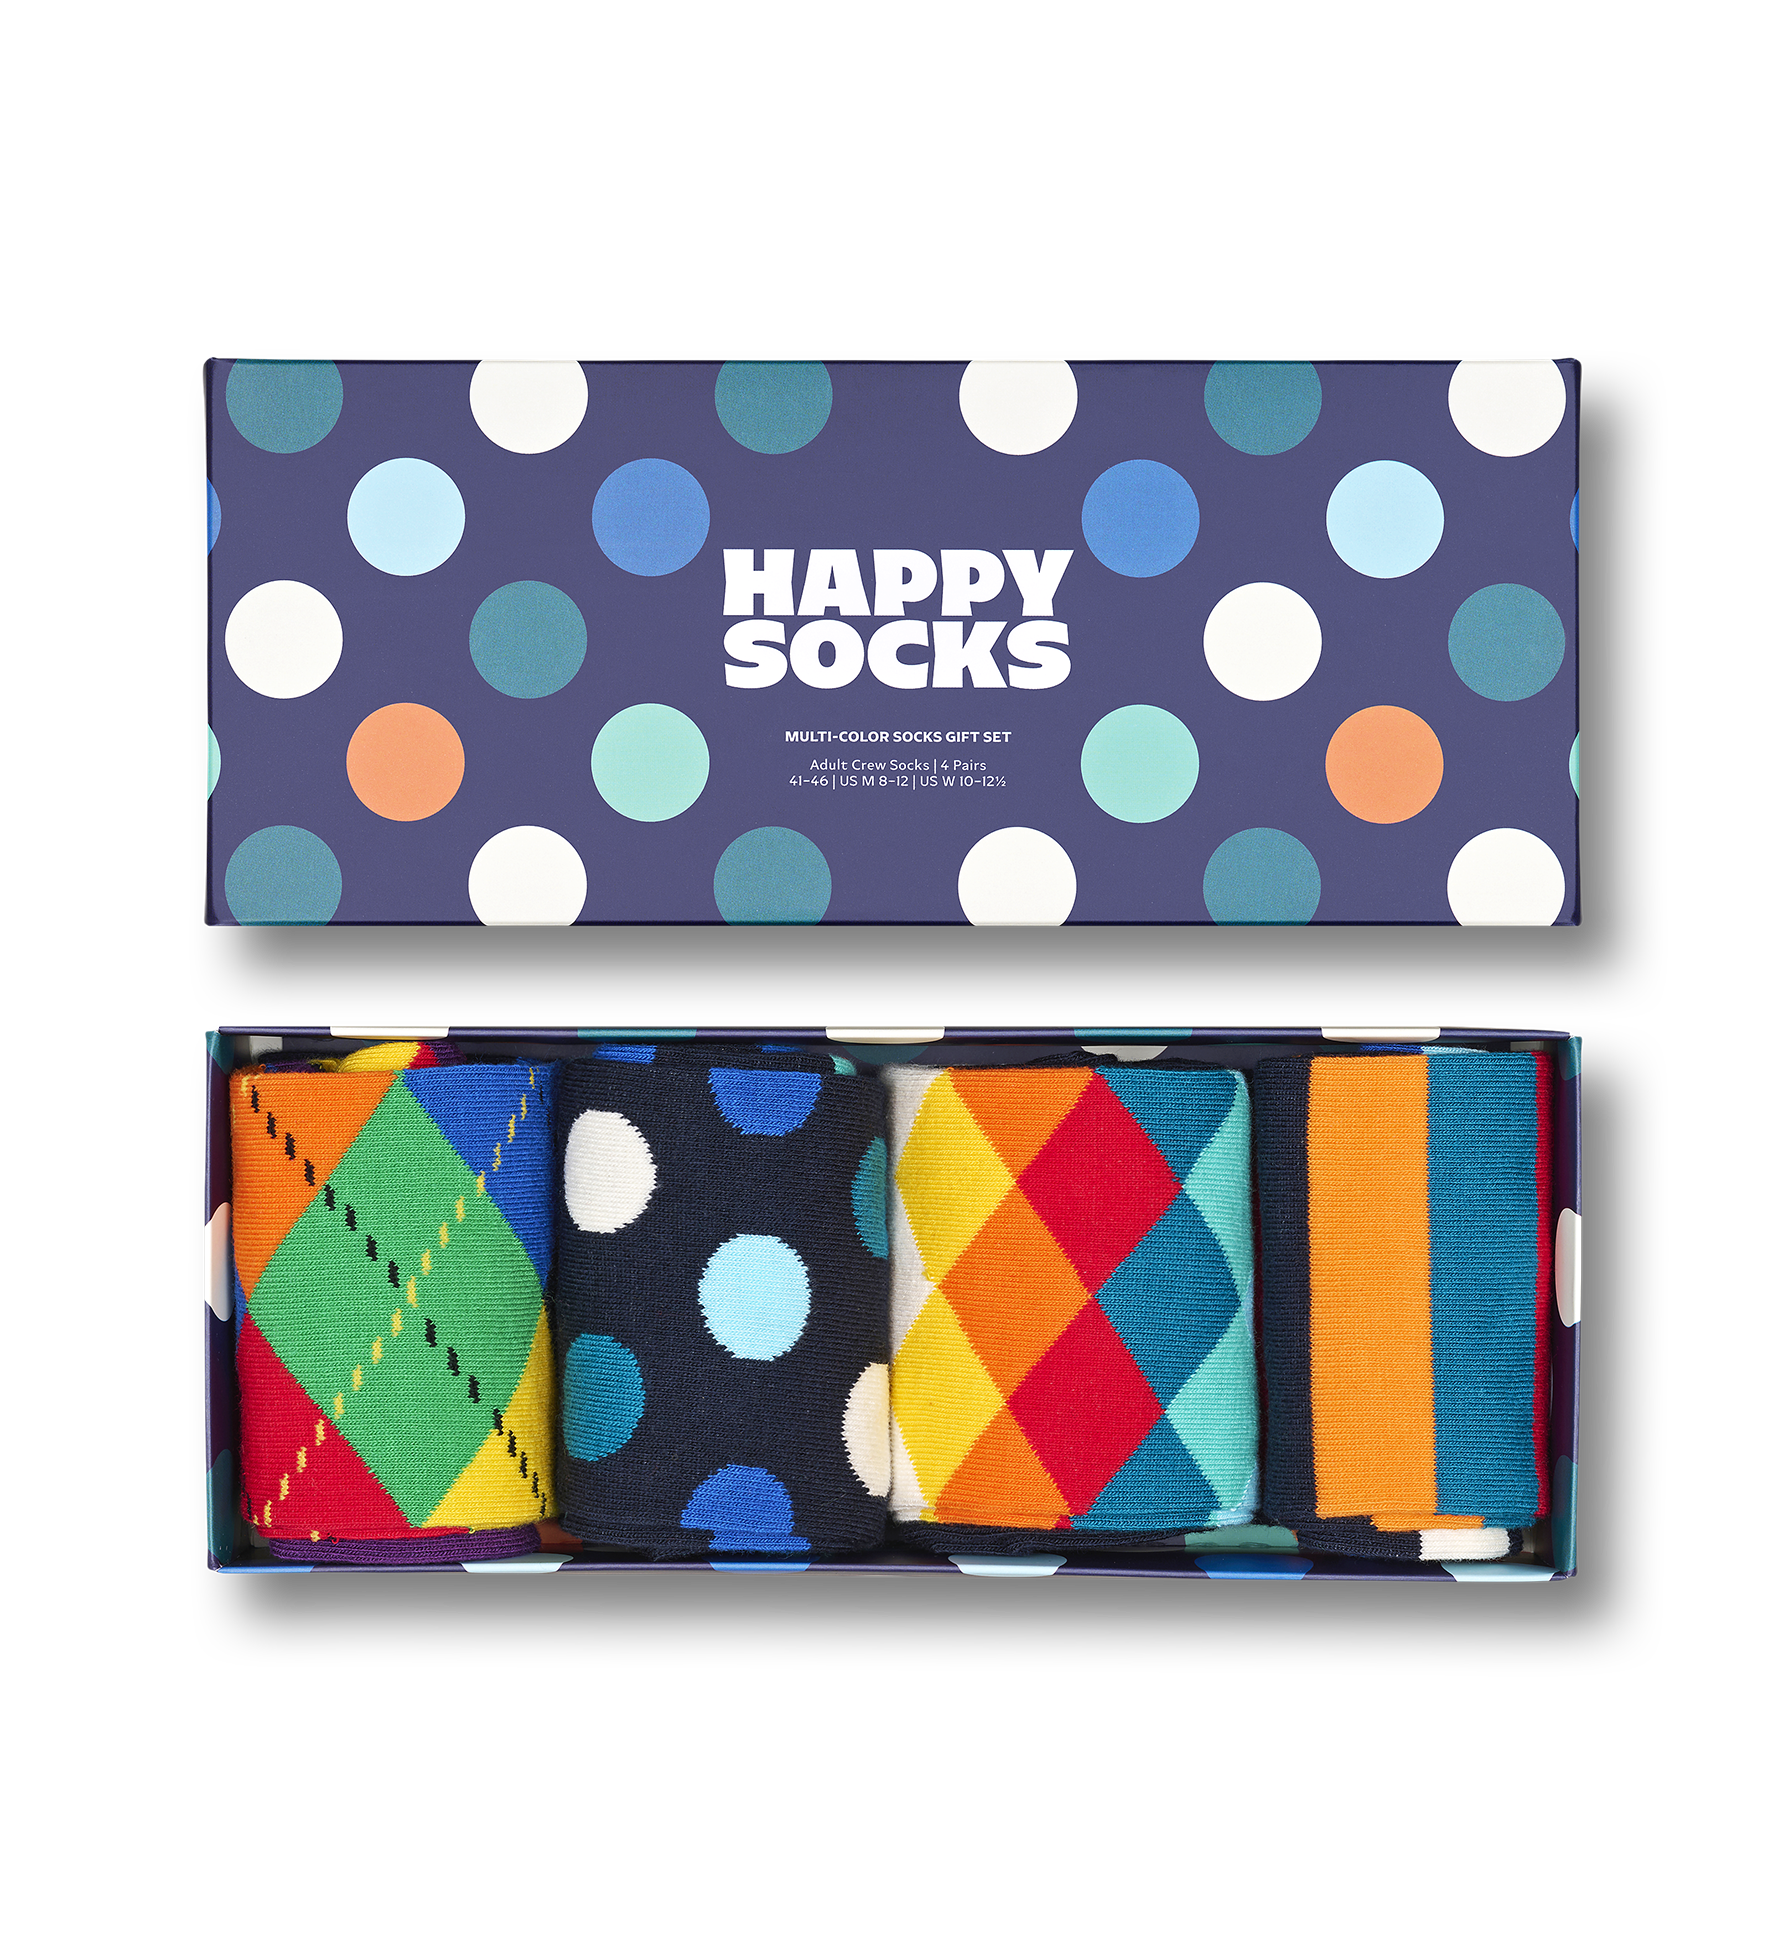 4-Pack Multi-Color Crew Gift Set